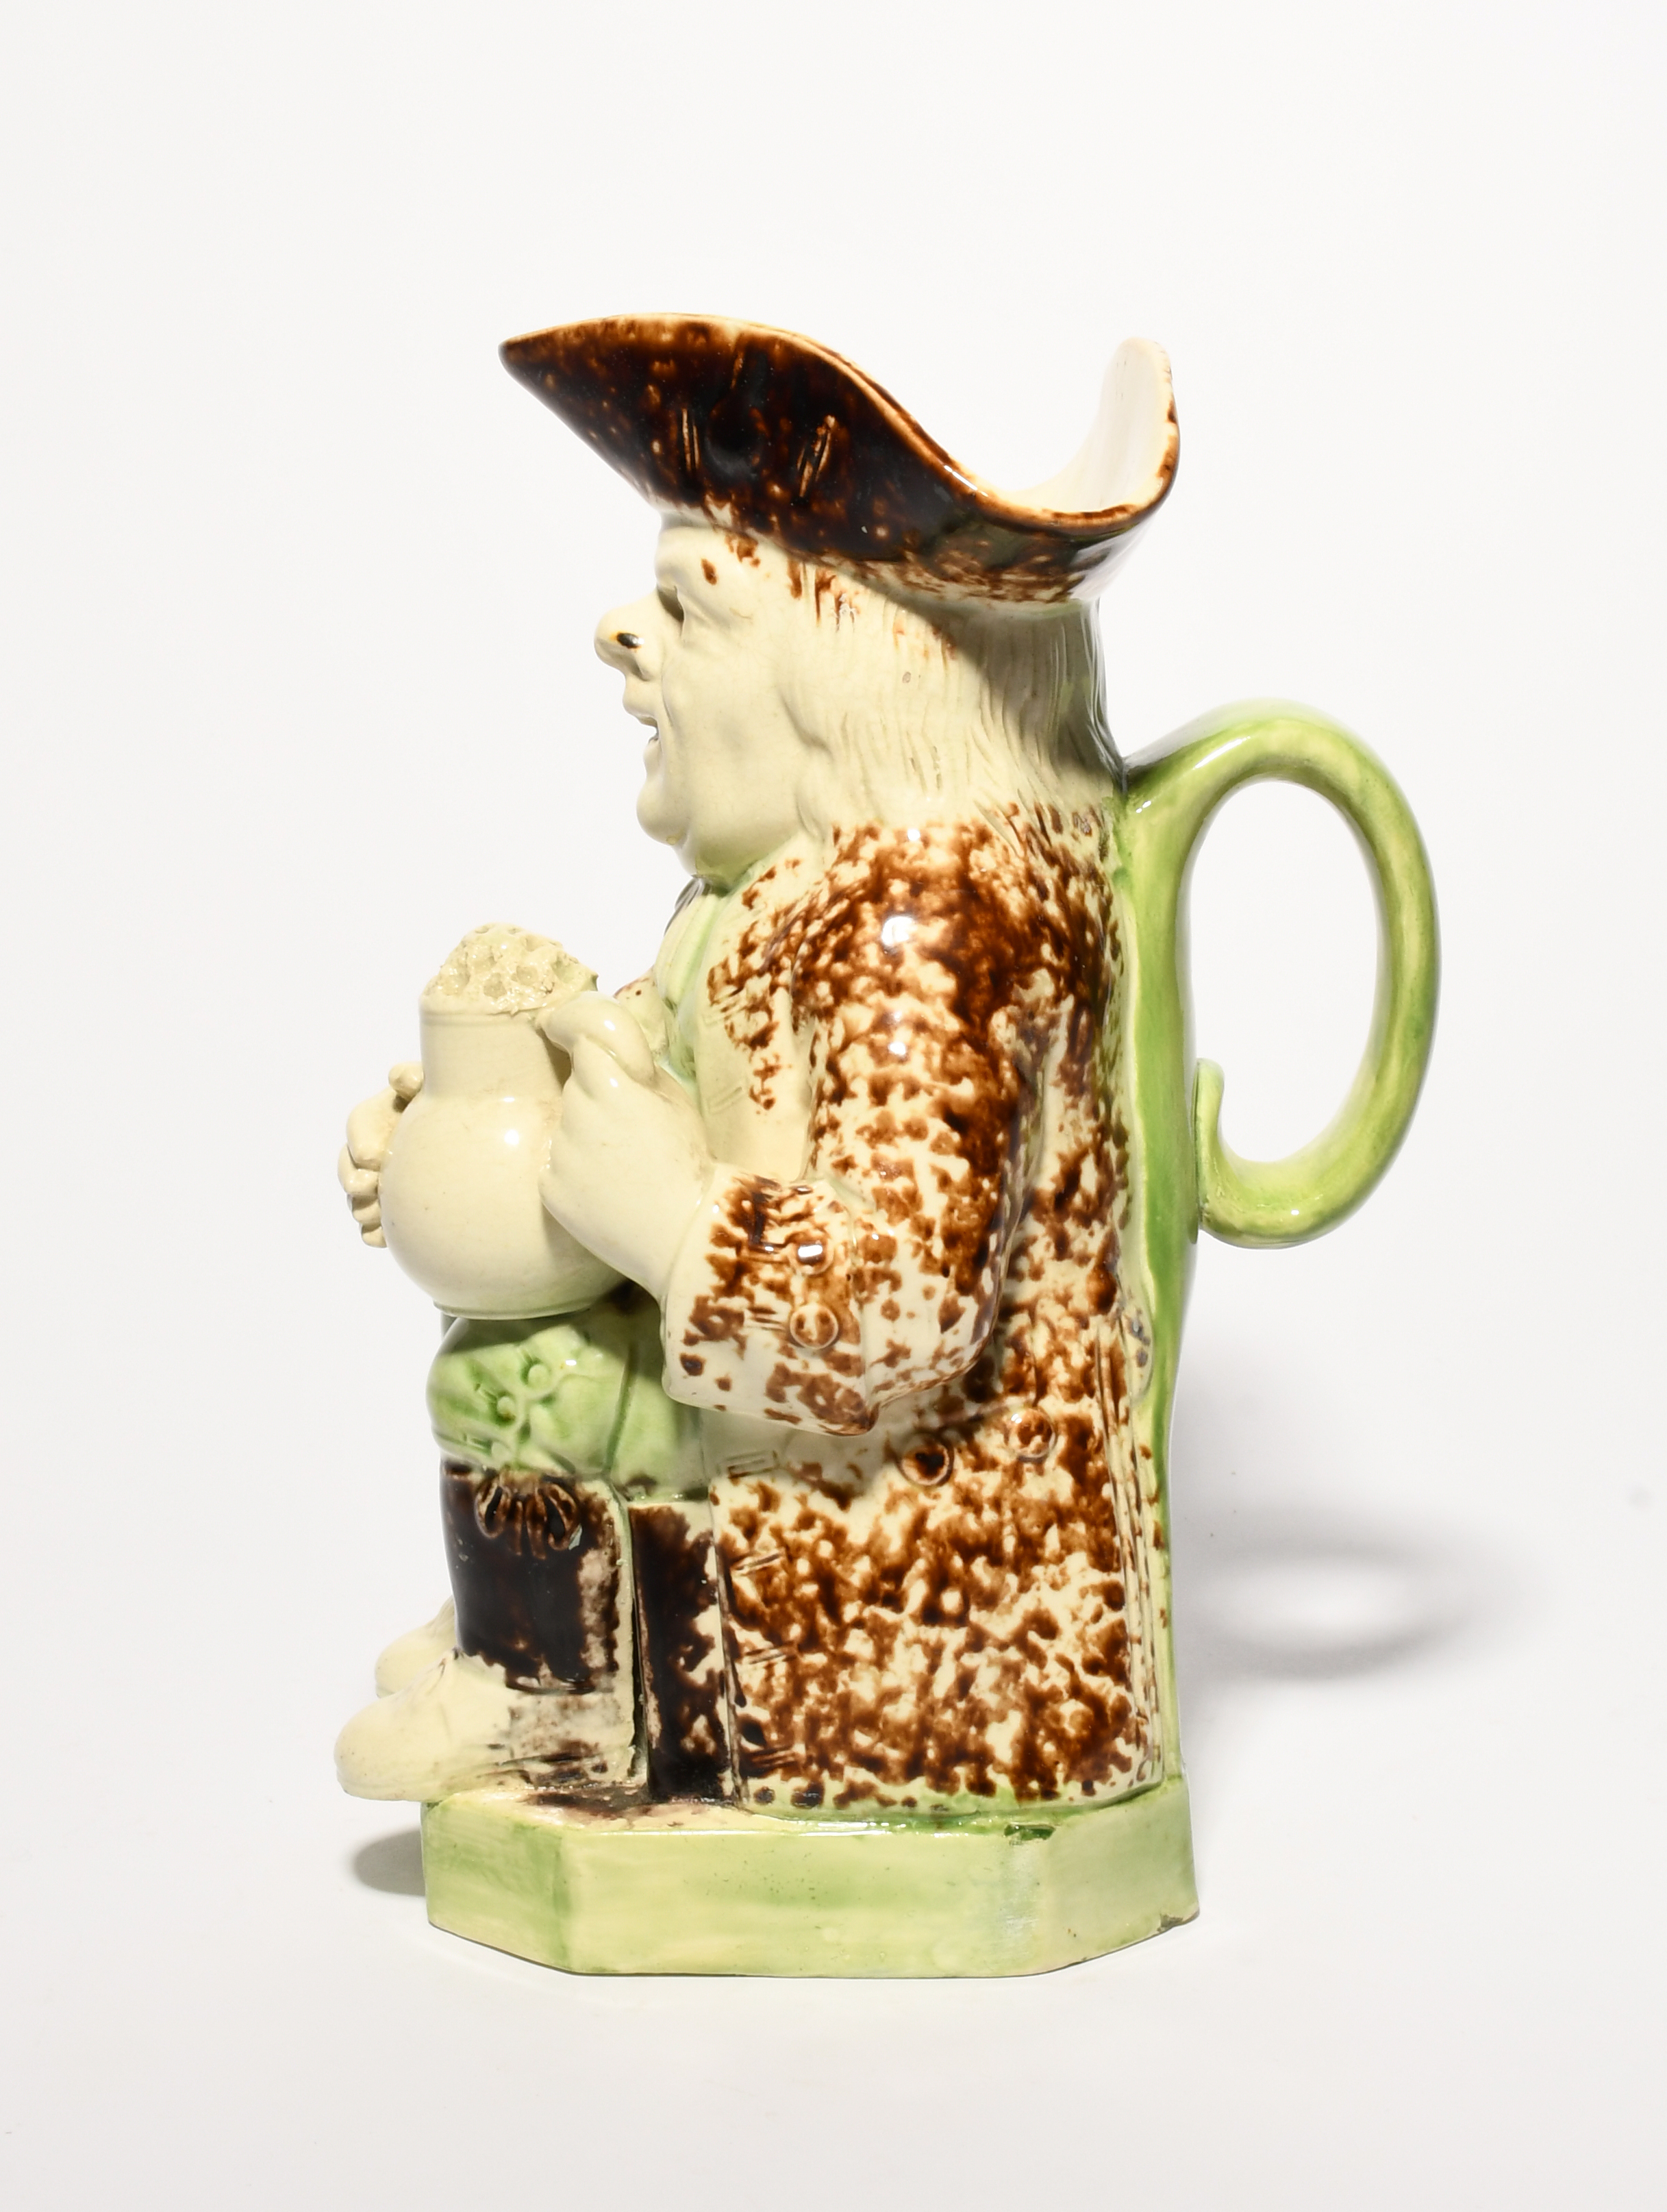 A creamware Wood type Toby jug, c.1790, seated with a foaming jug of ale, his waistcoat and breeches - Image 3 of 3